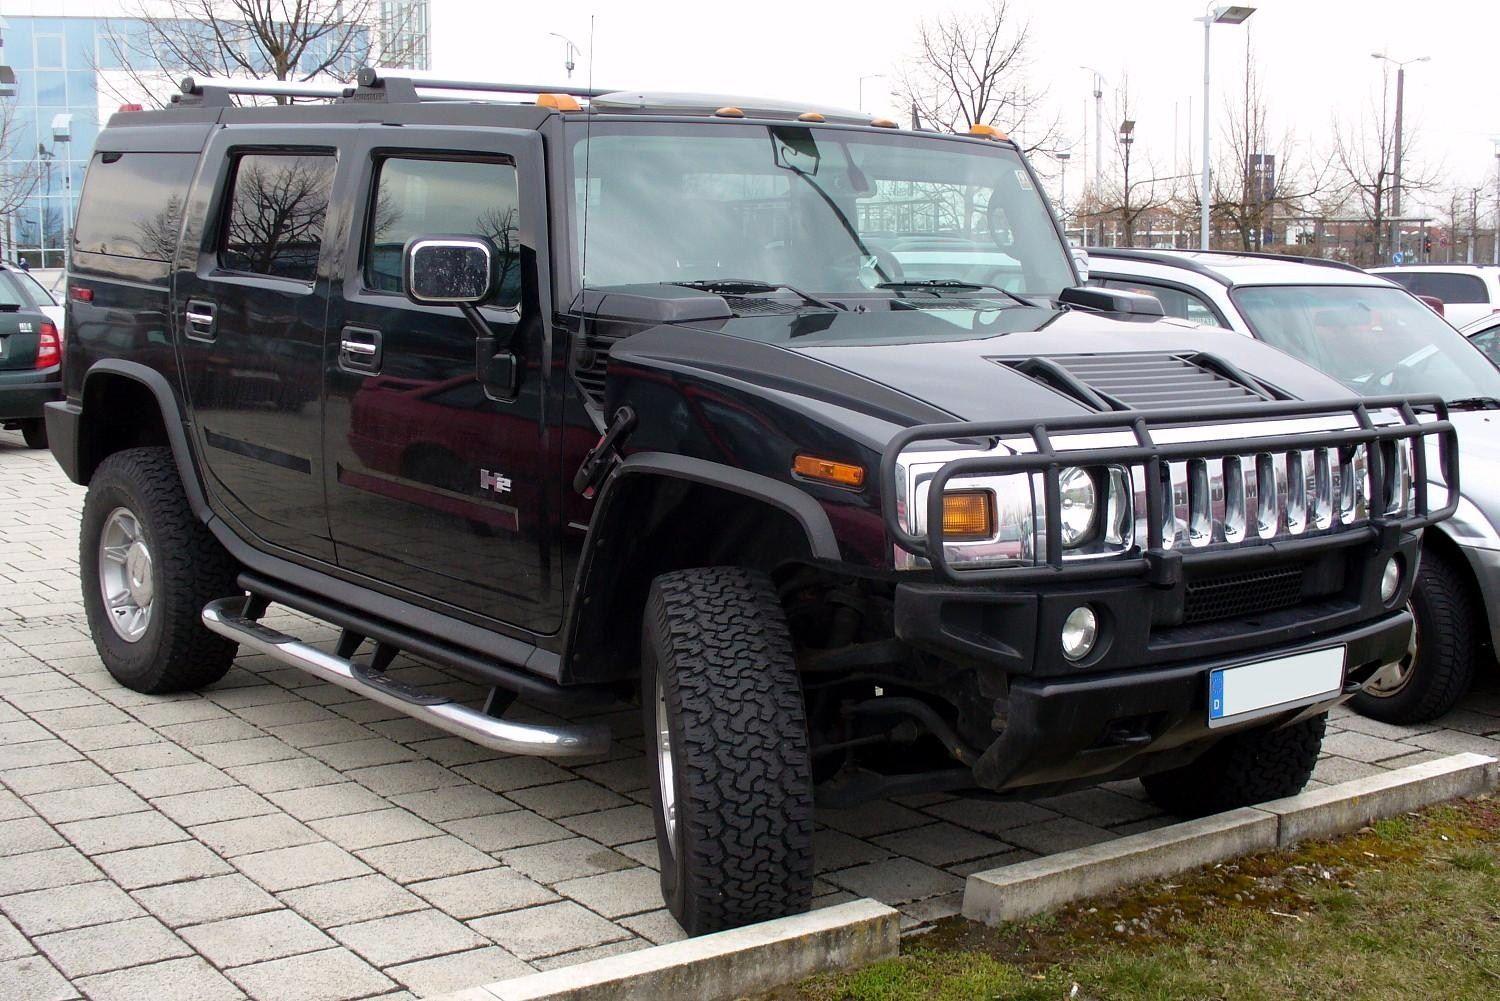 Picture 2015 Hummer H2 HD Car Wallpaper, Image